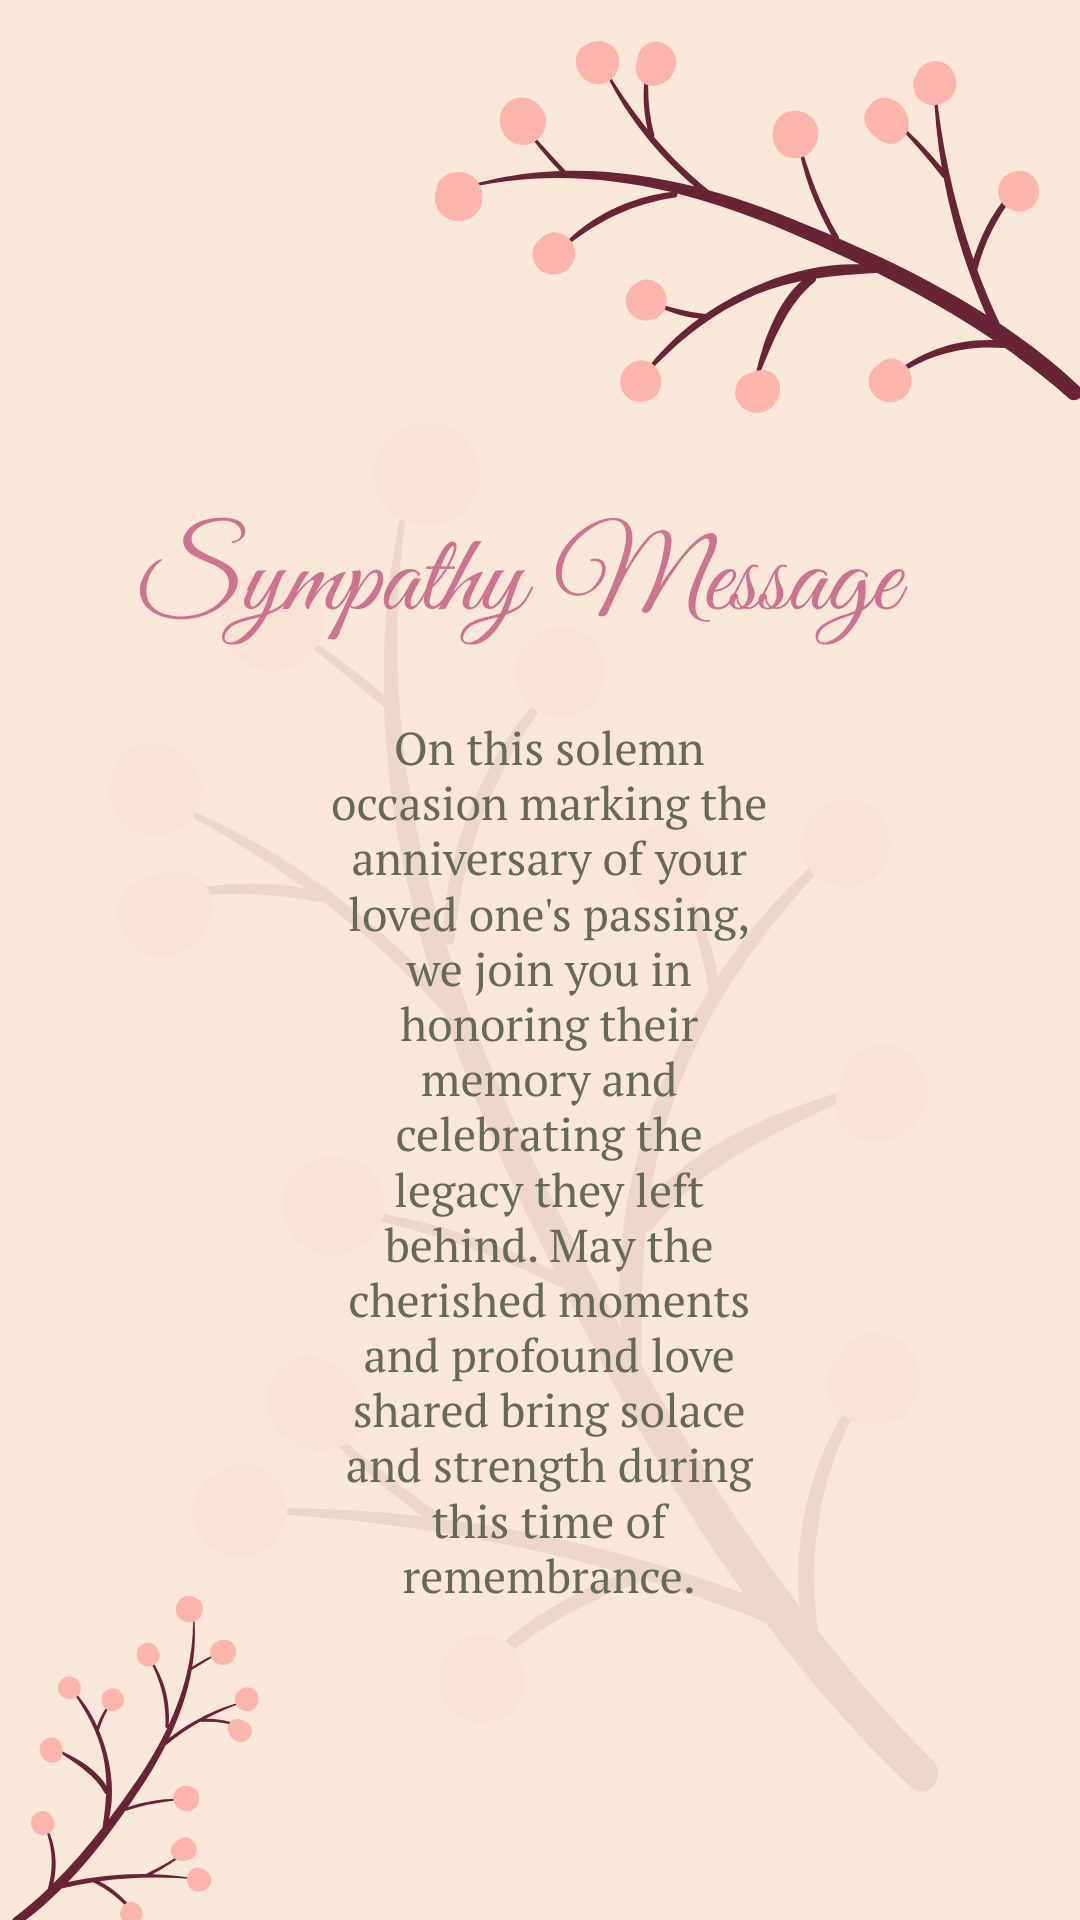 Free sympathy message for anniversary of death Template